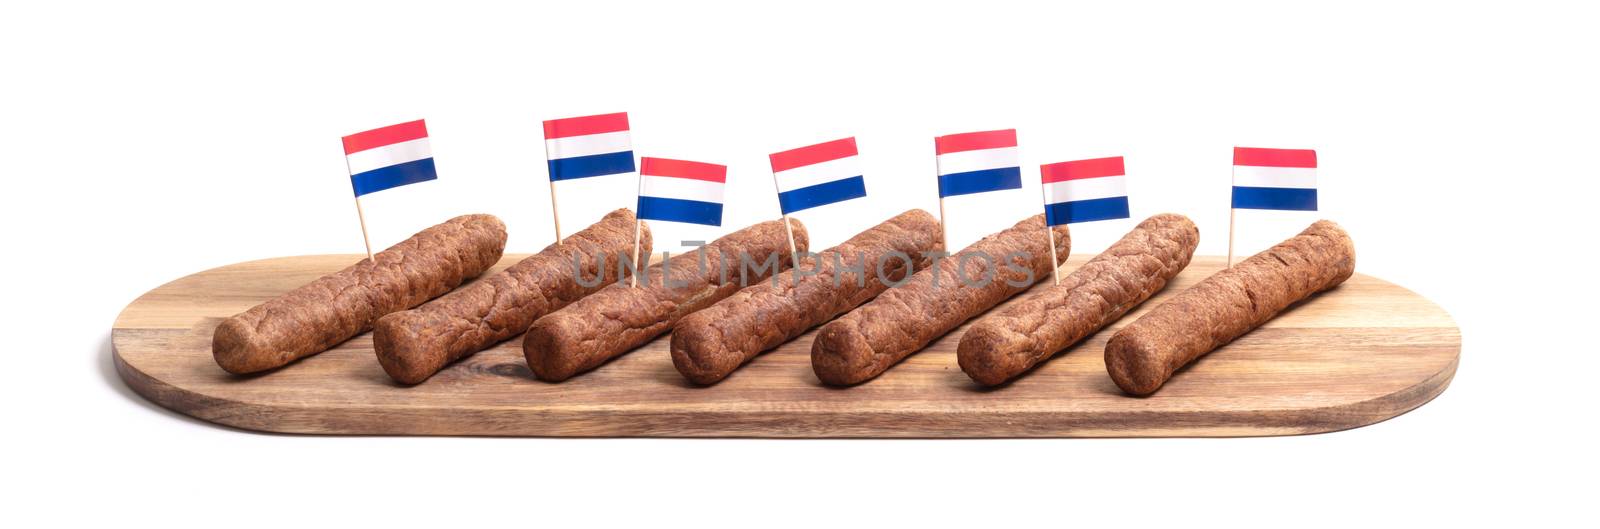 Wooden tray with frikadellen, a Dutch fast food snack by michaklootwijk